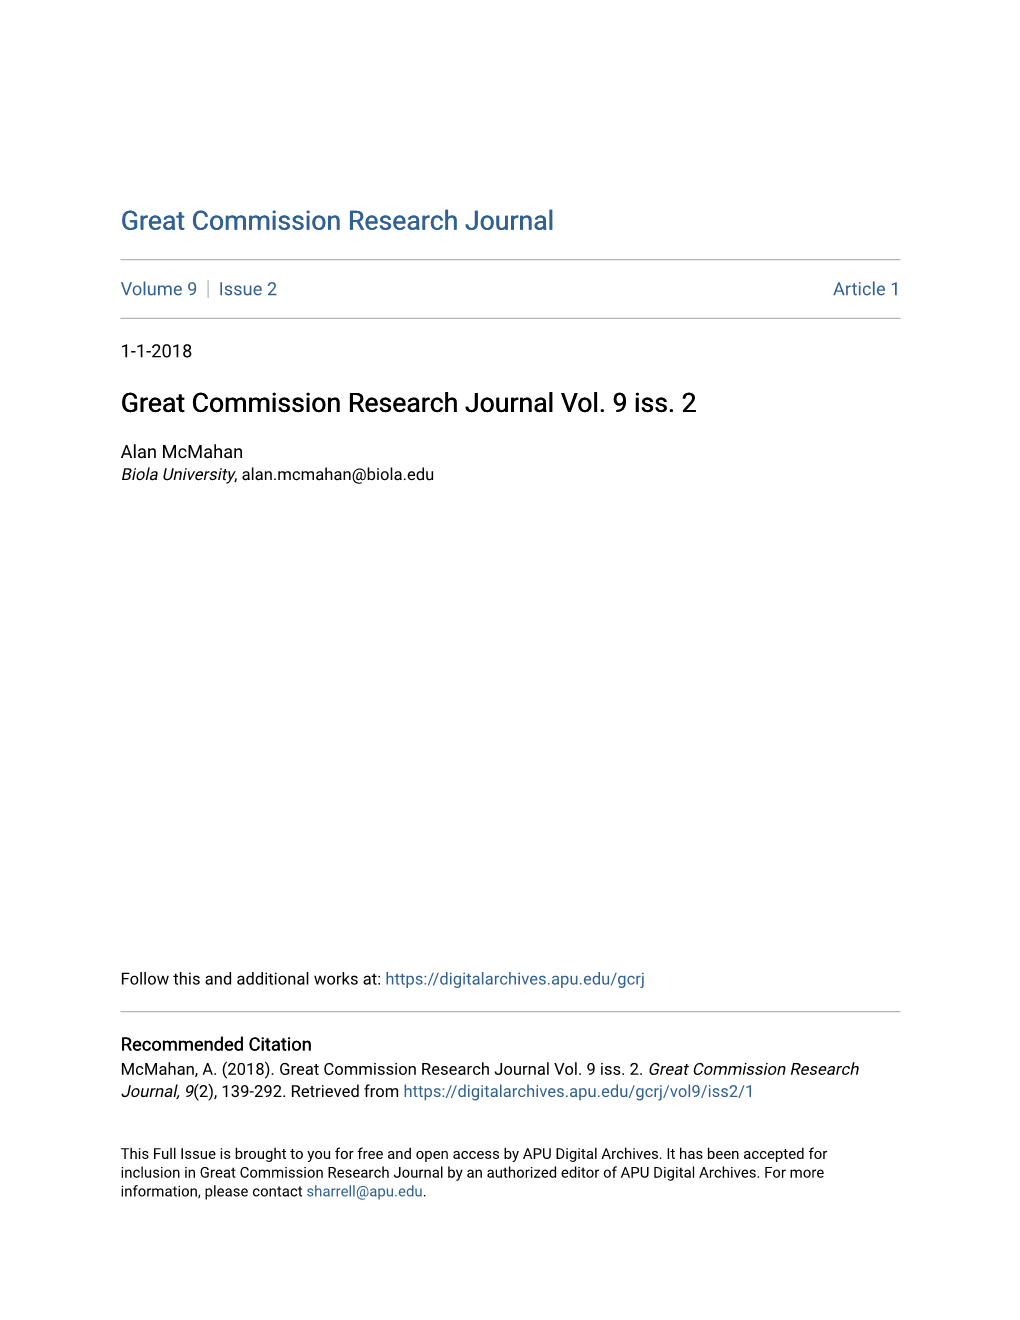 Great Commission Research Journal Vol. 9 Iss. 2